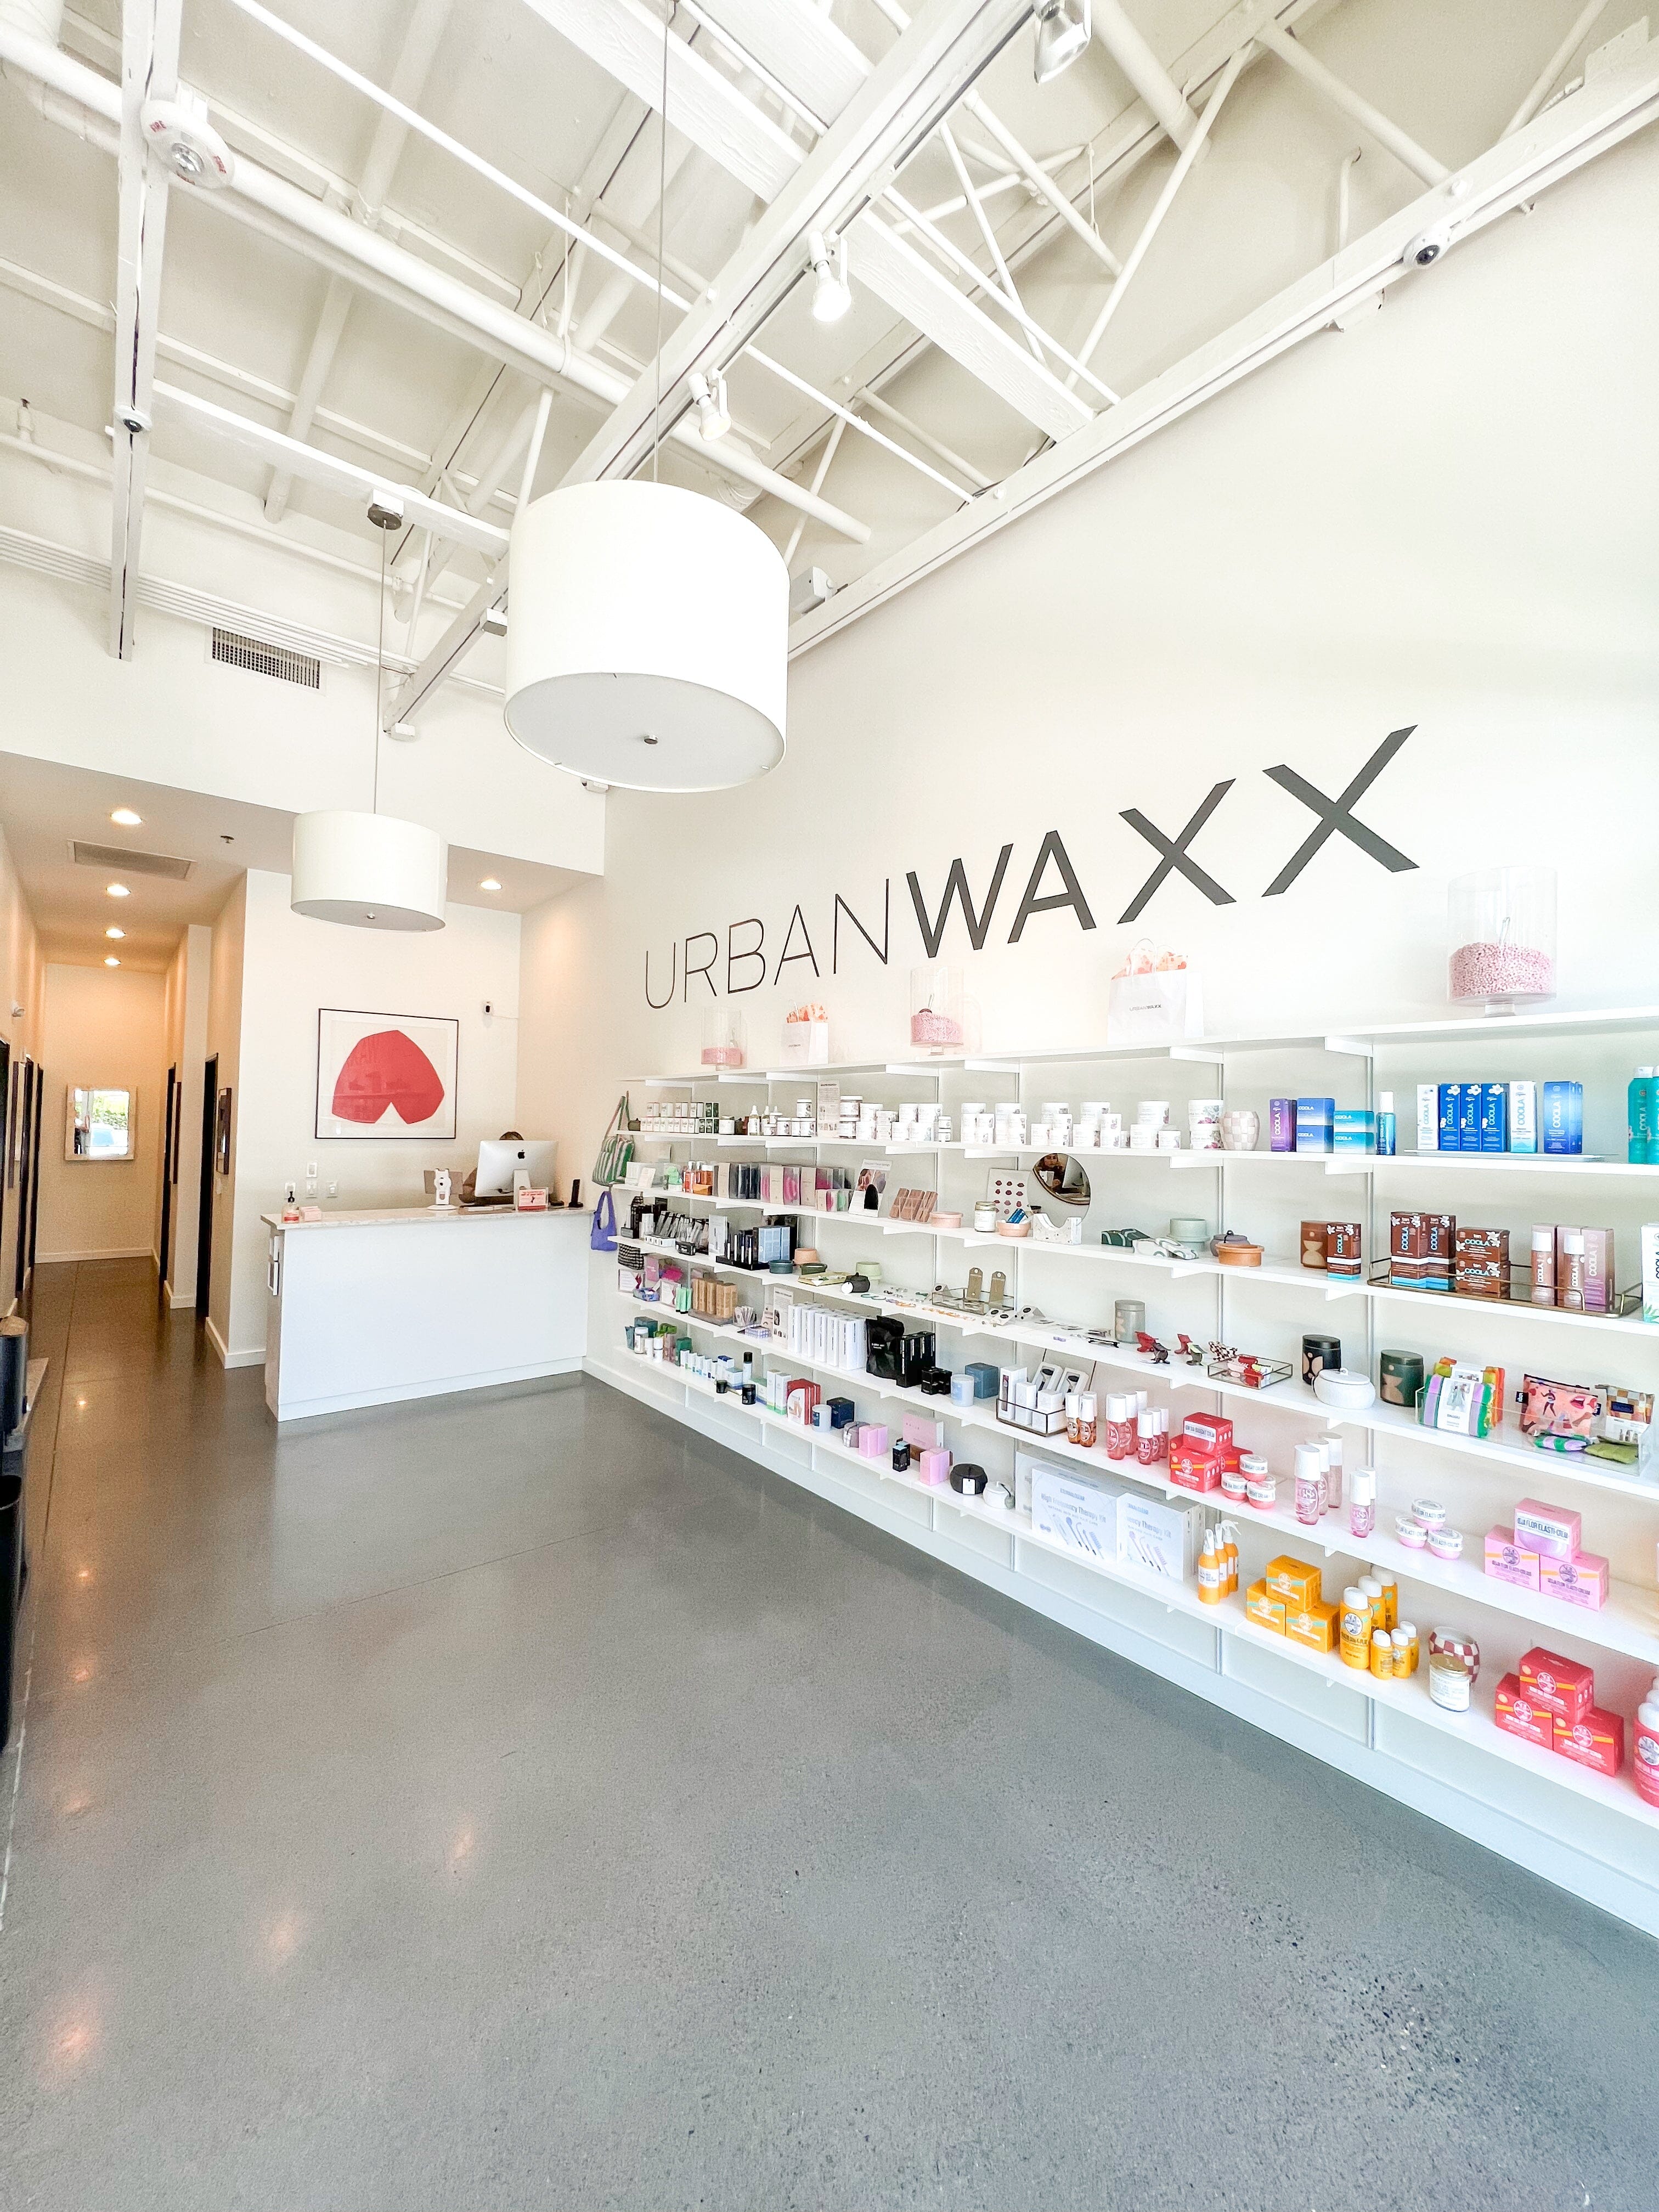 Urban Waxx Uses Shelves To Display Products in Nine Locations